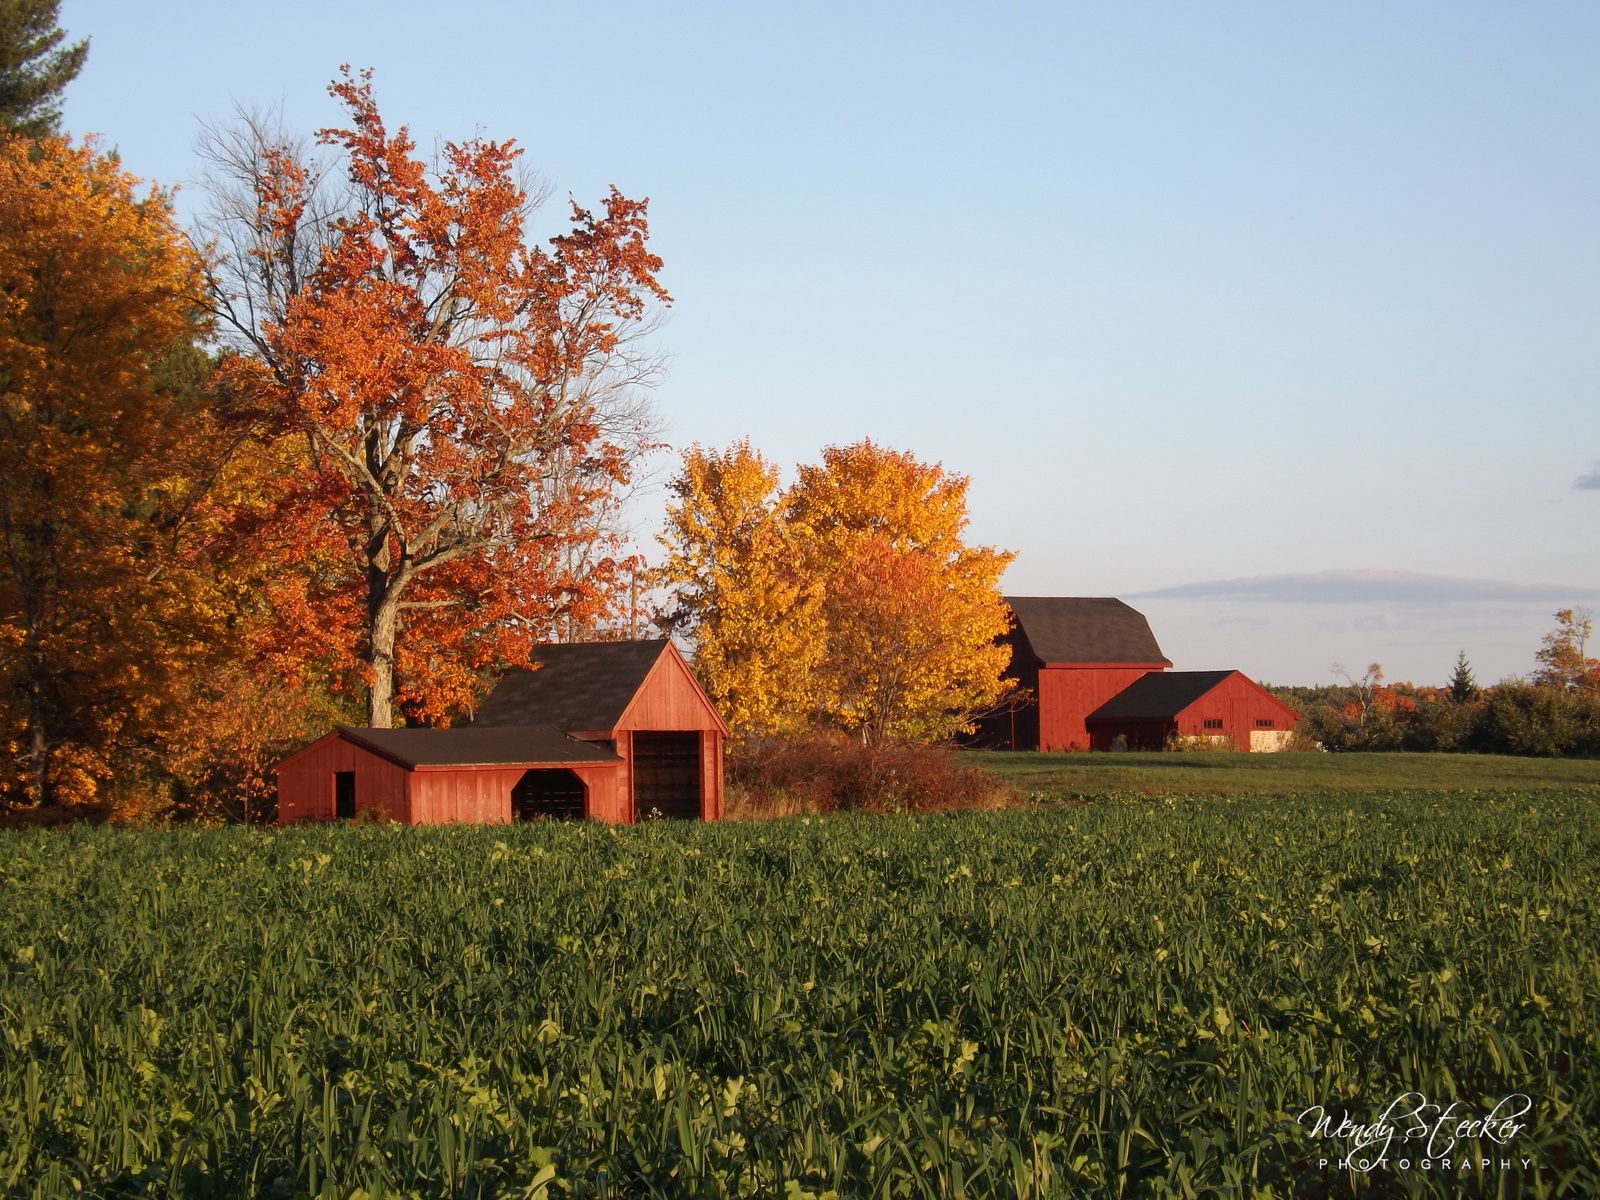 New England Red Barns Landscape Photo Photo that Capture the Unique Beauty of New England